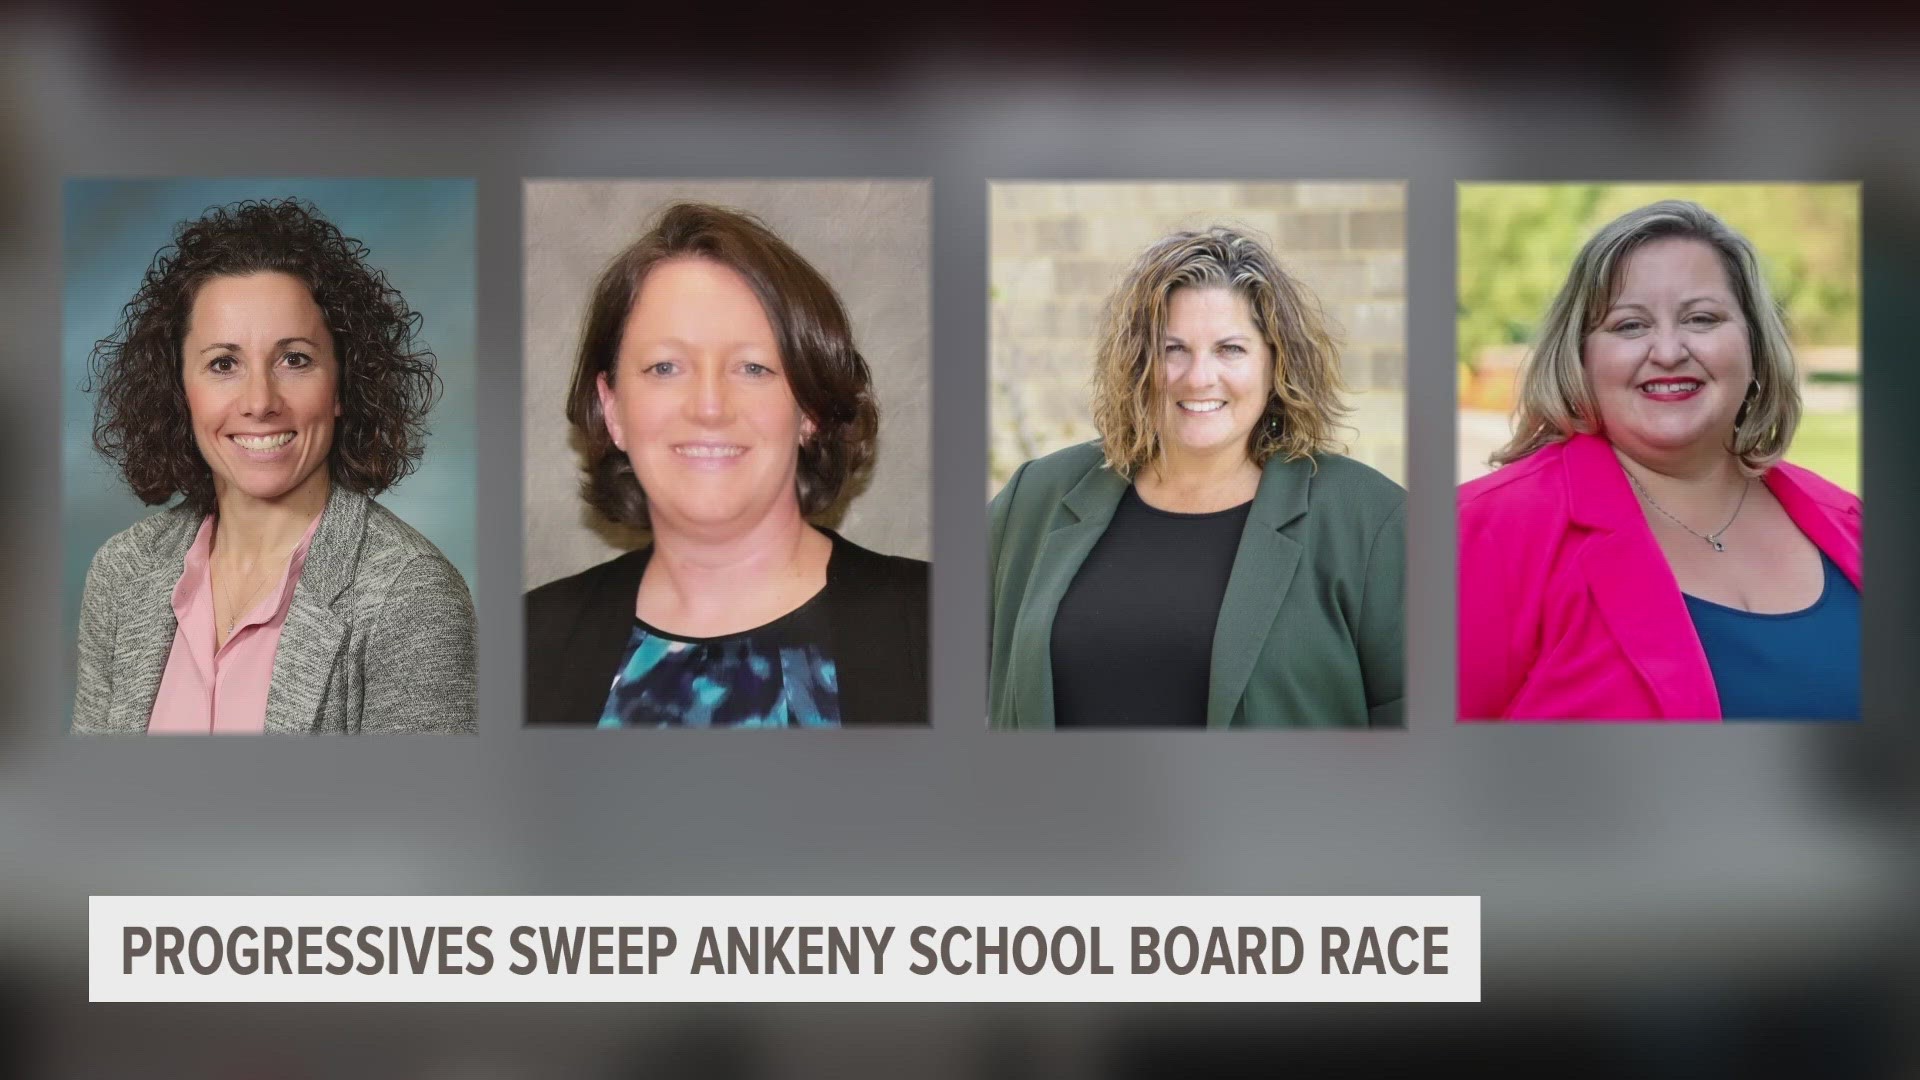 Eight candidates were vying for four at-large seats on the Ankeny Board of Education. Progressive candidates snagged three of those spots.